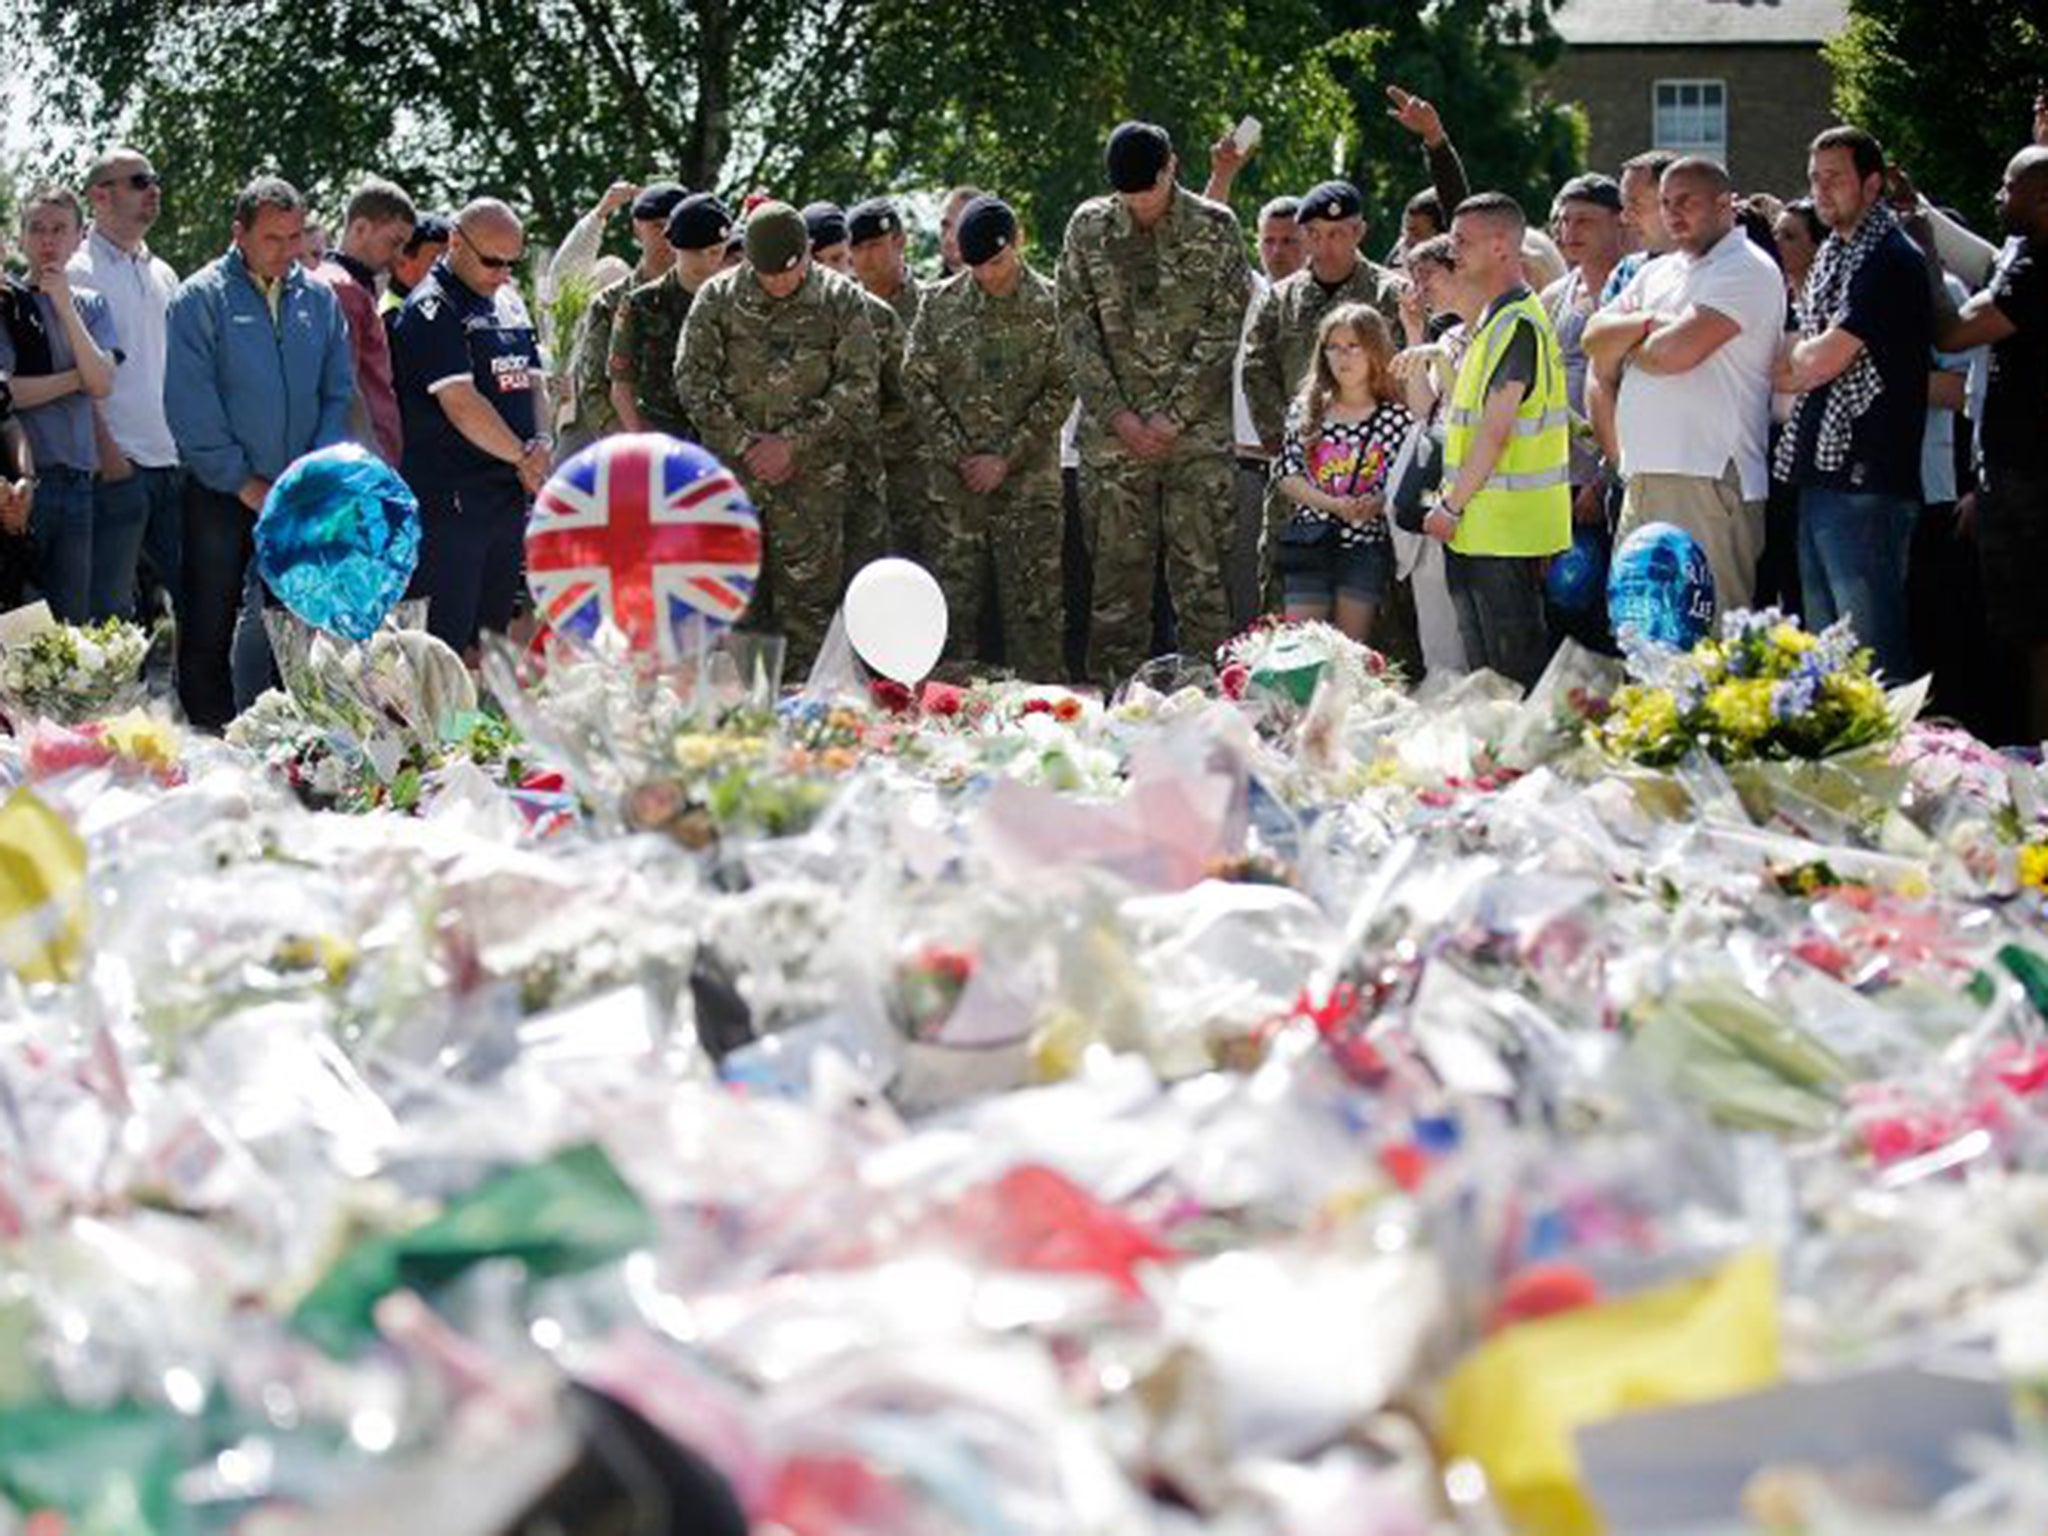 Floral tributes to Fusilier Lee Rigby at the spot where he was killed